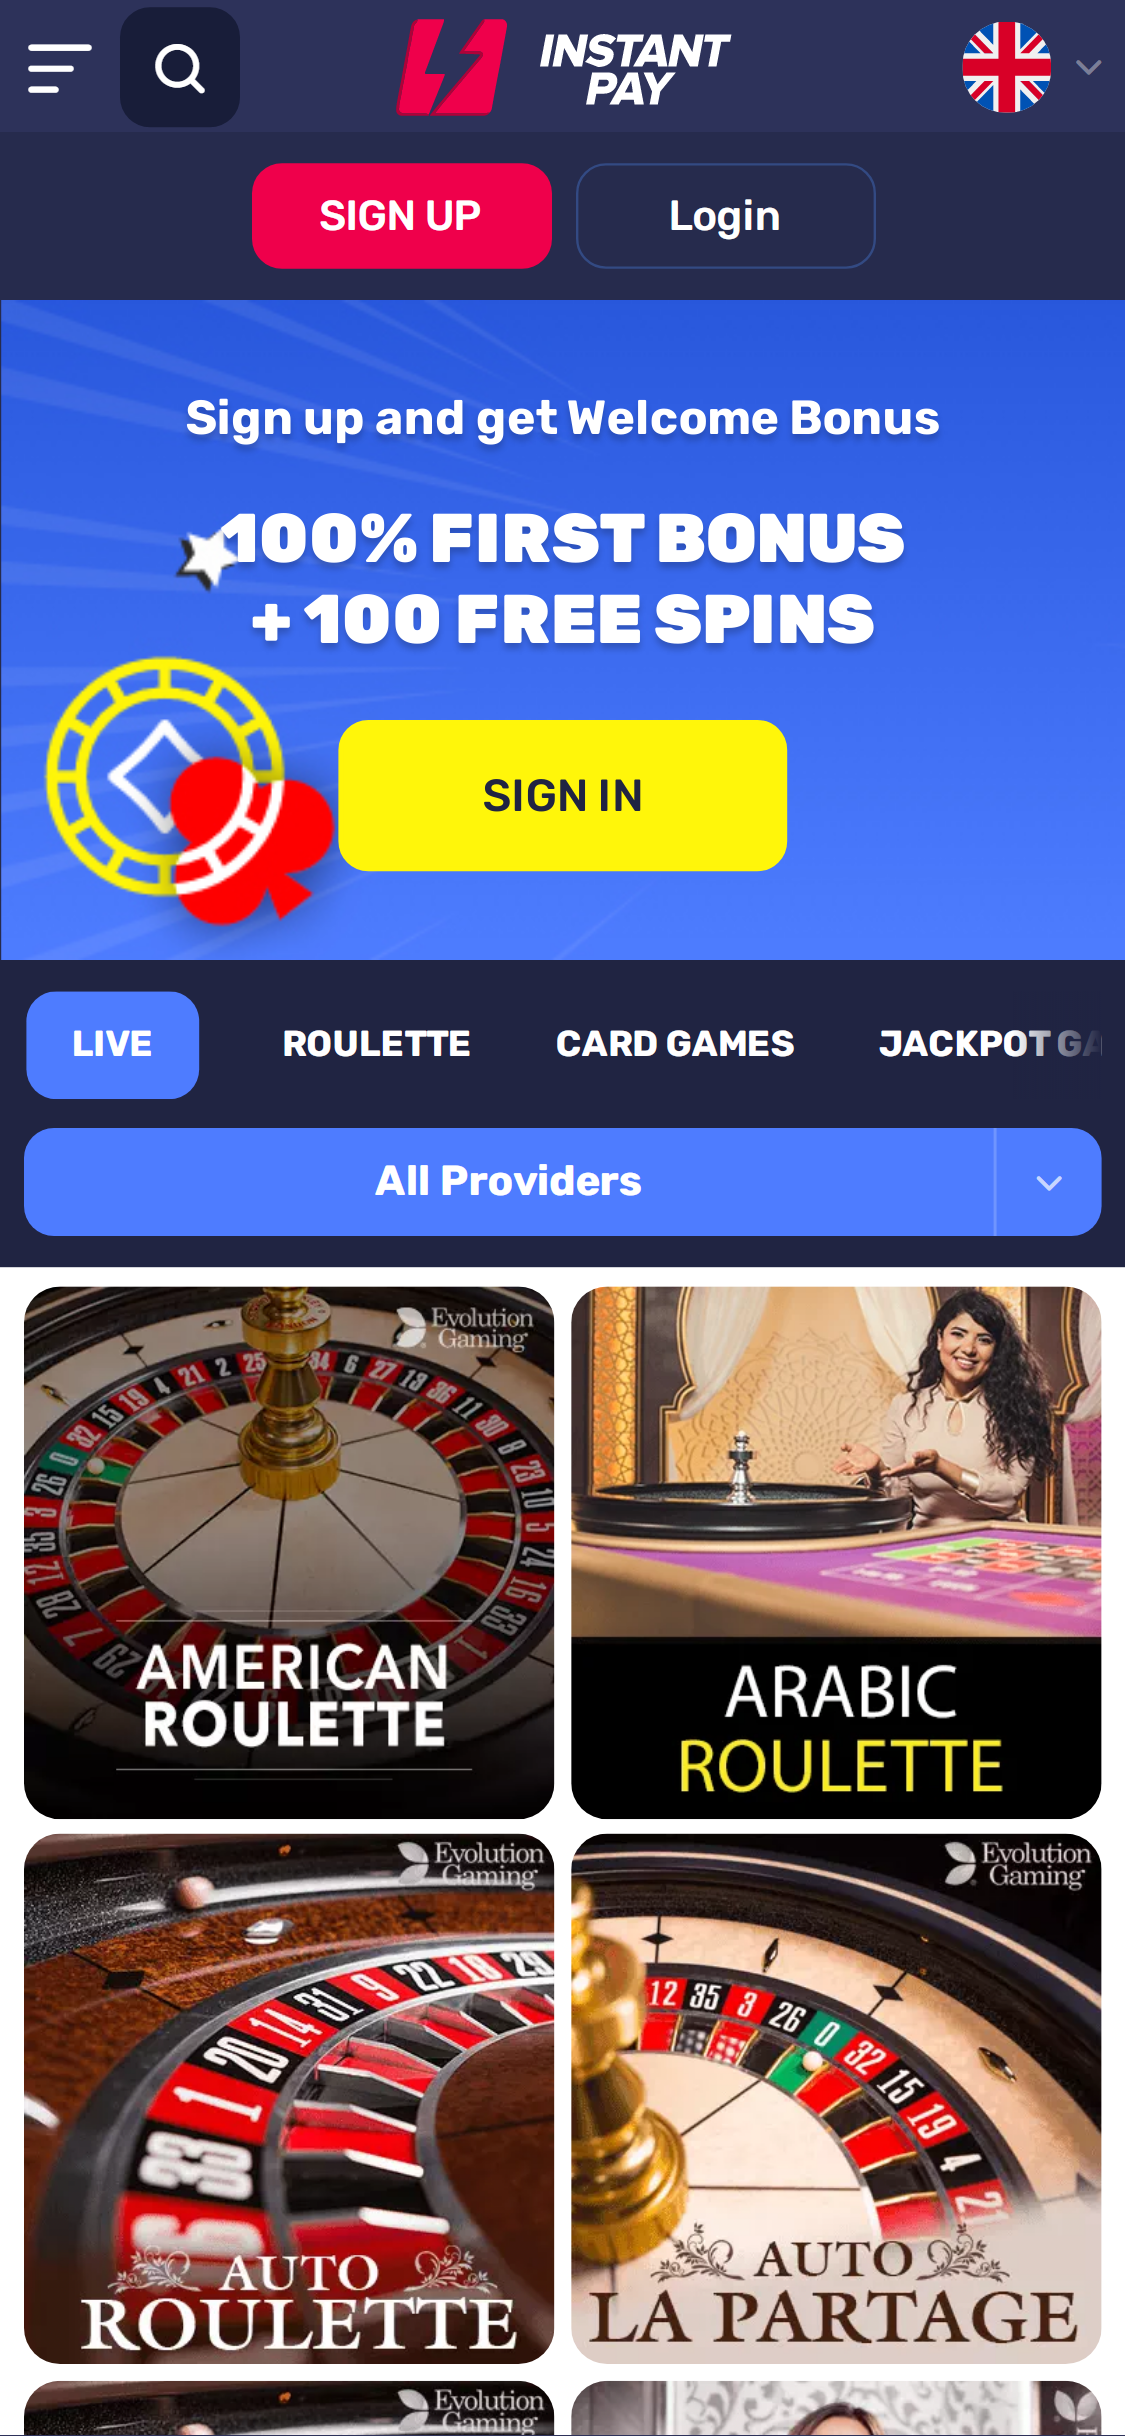 Instant Pay Casino Mobile Live Dealer Games Review